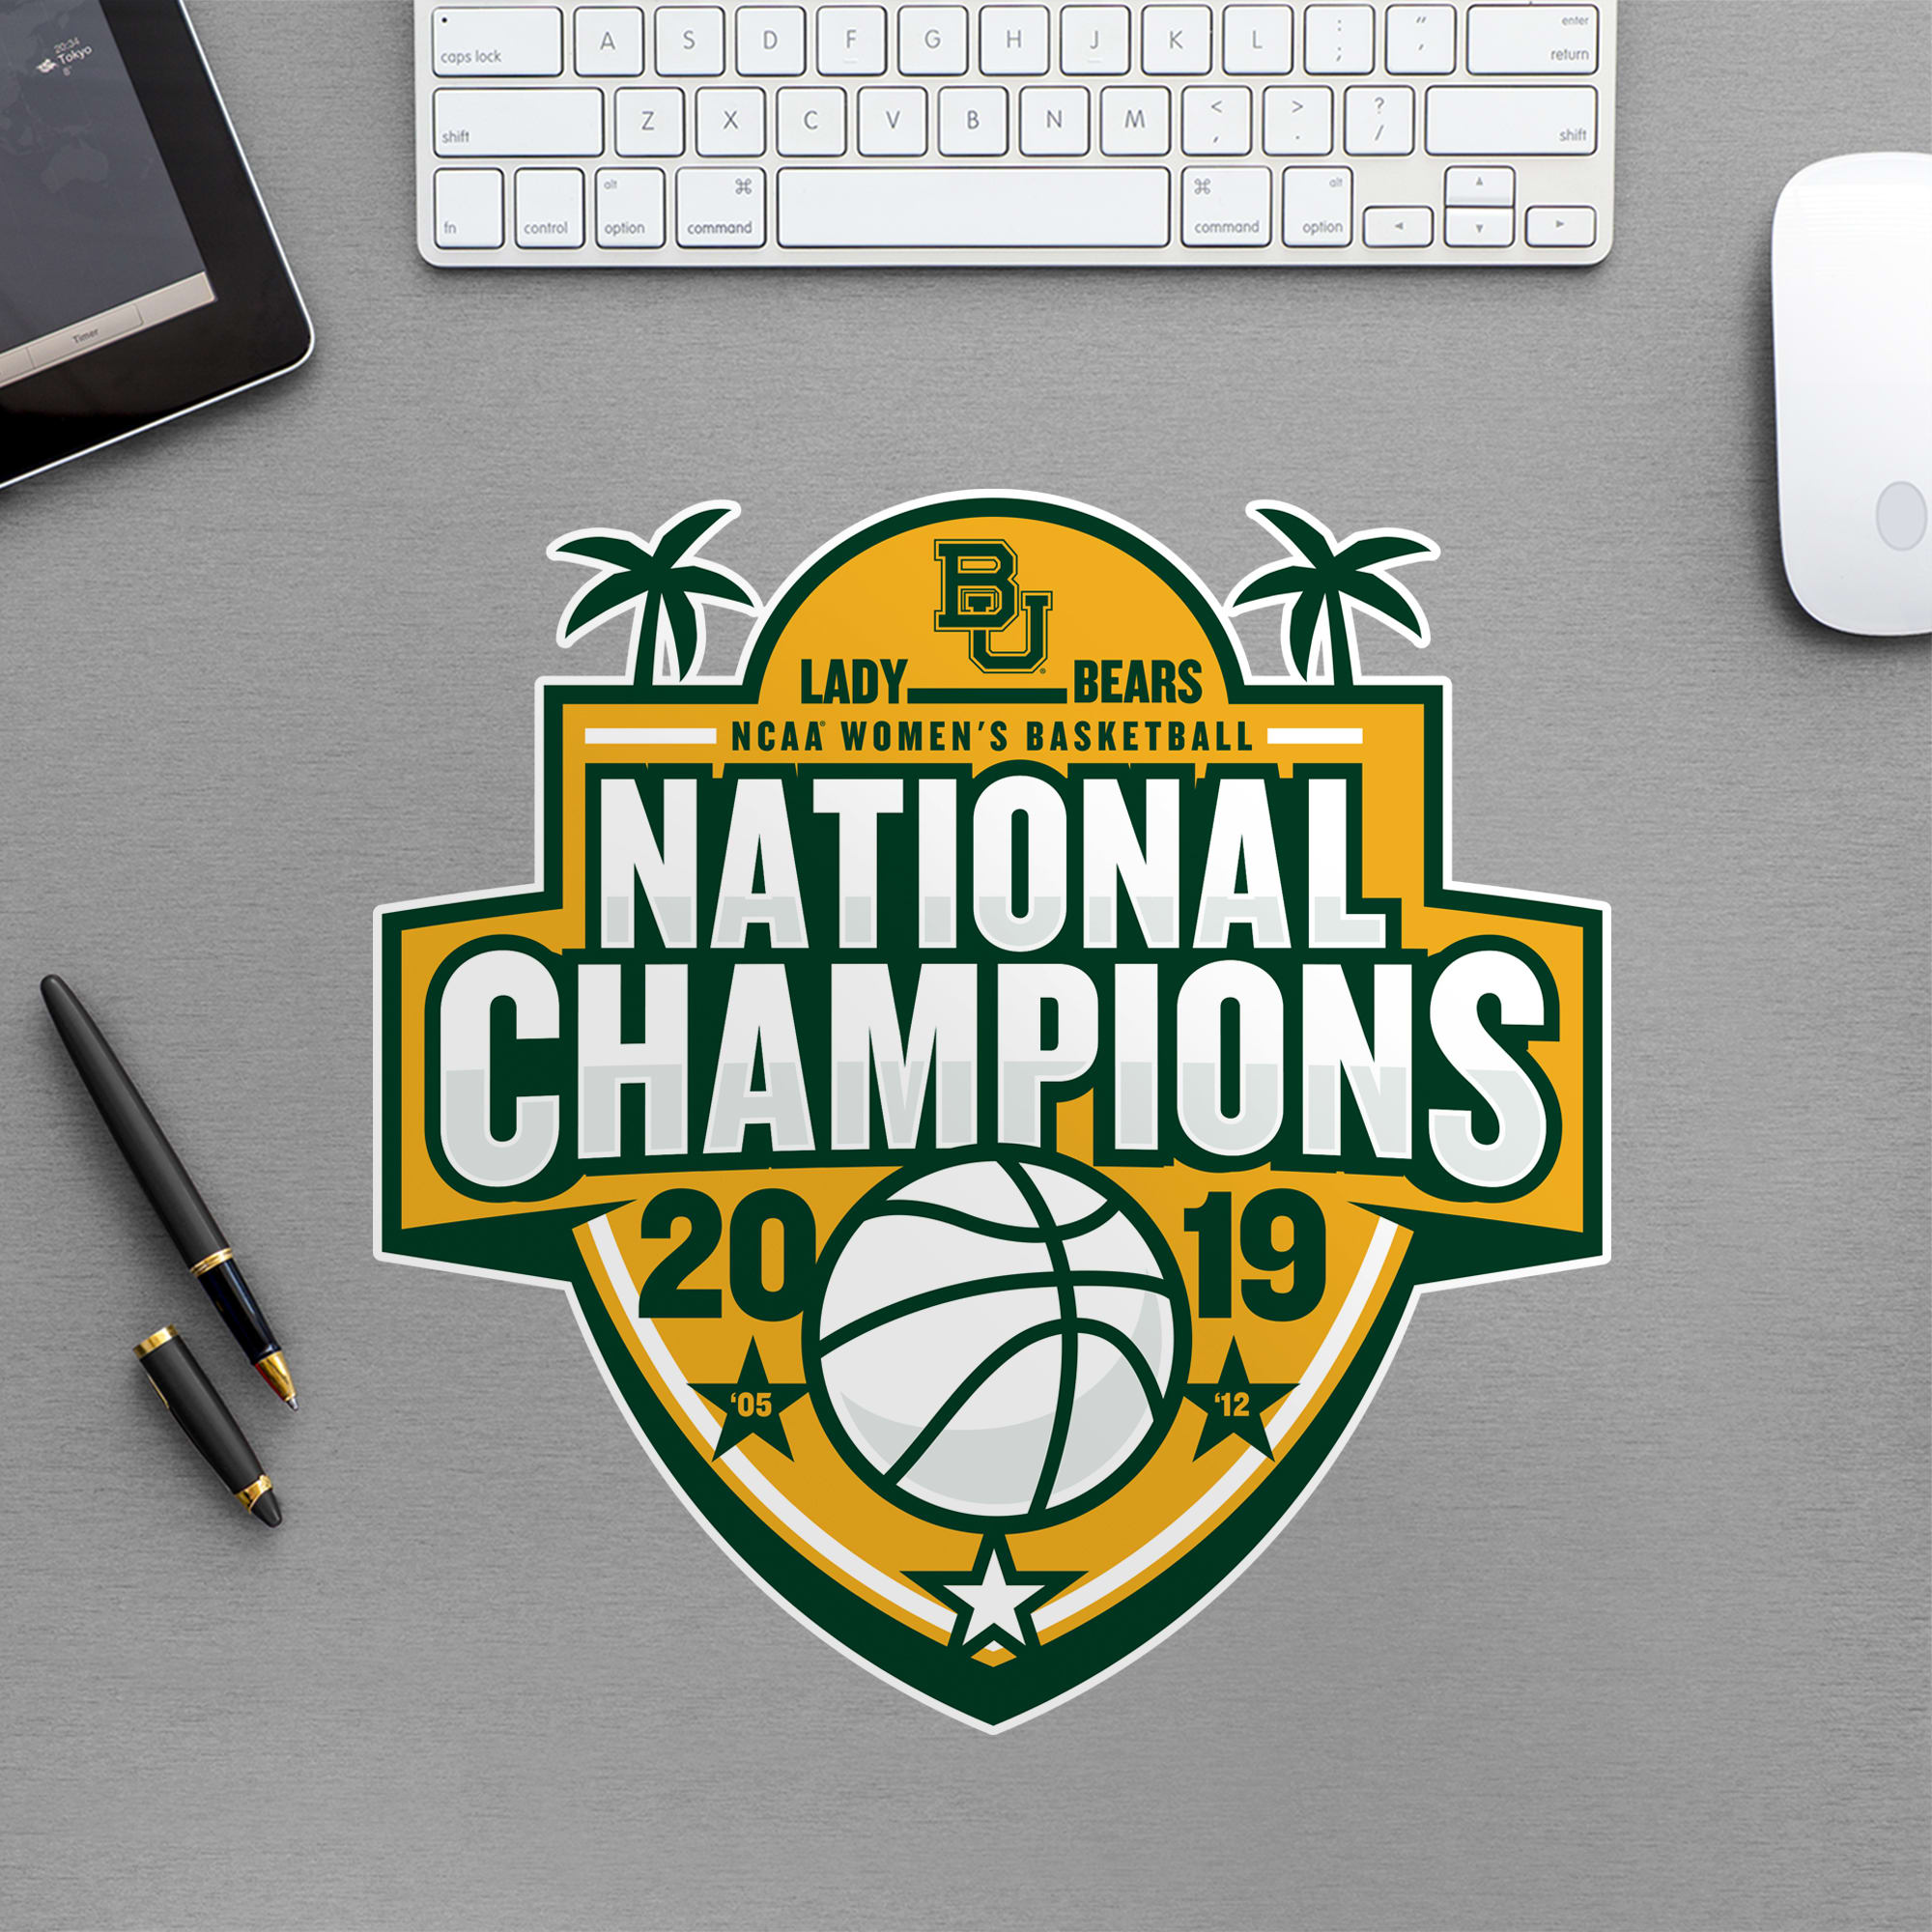 Baylor Bears: 2019 Womens Basketball National Champions Logo - Officially Licensed Removable Wall Decal Large by Fathead | Viny